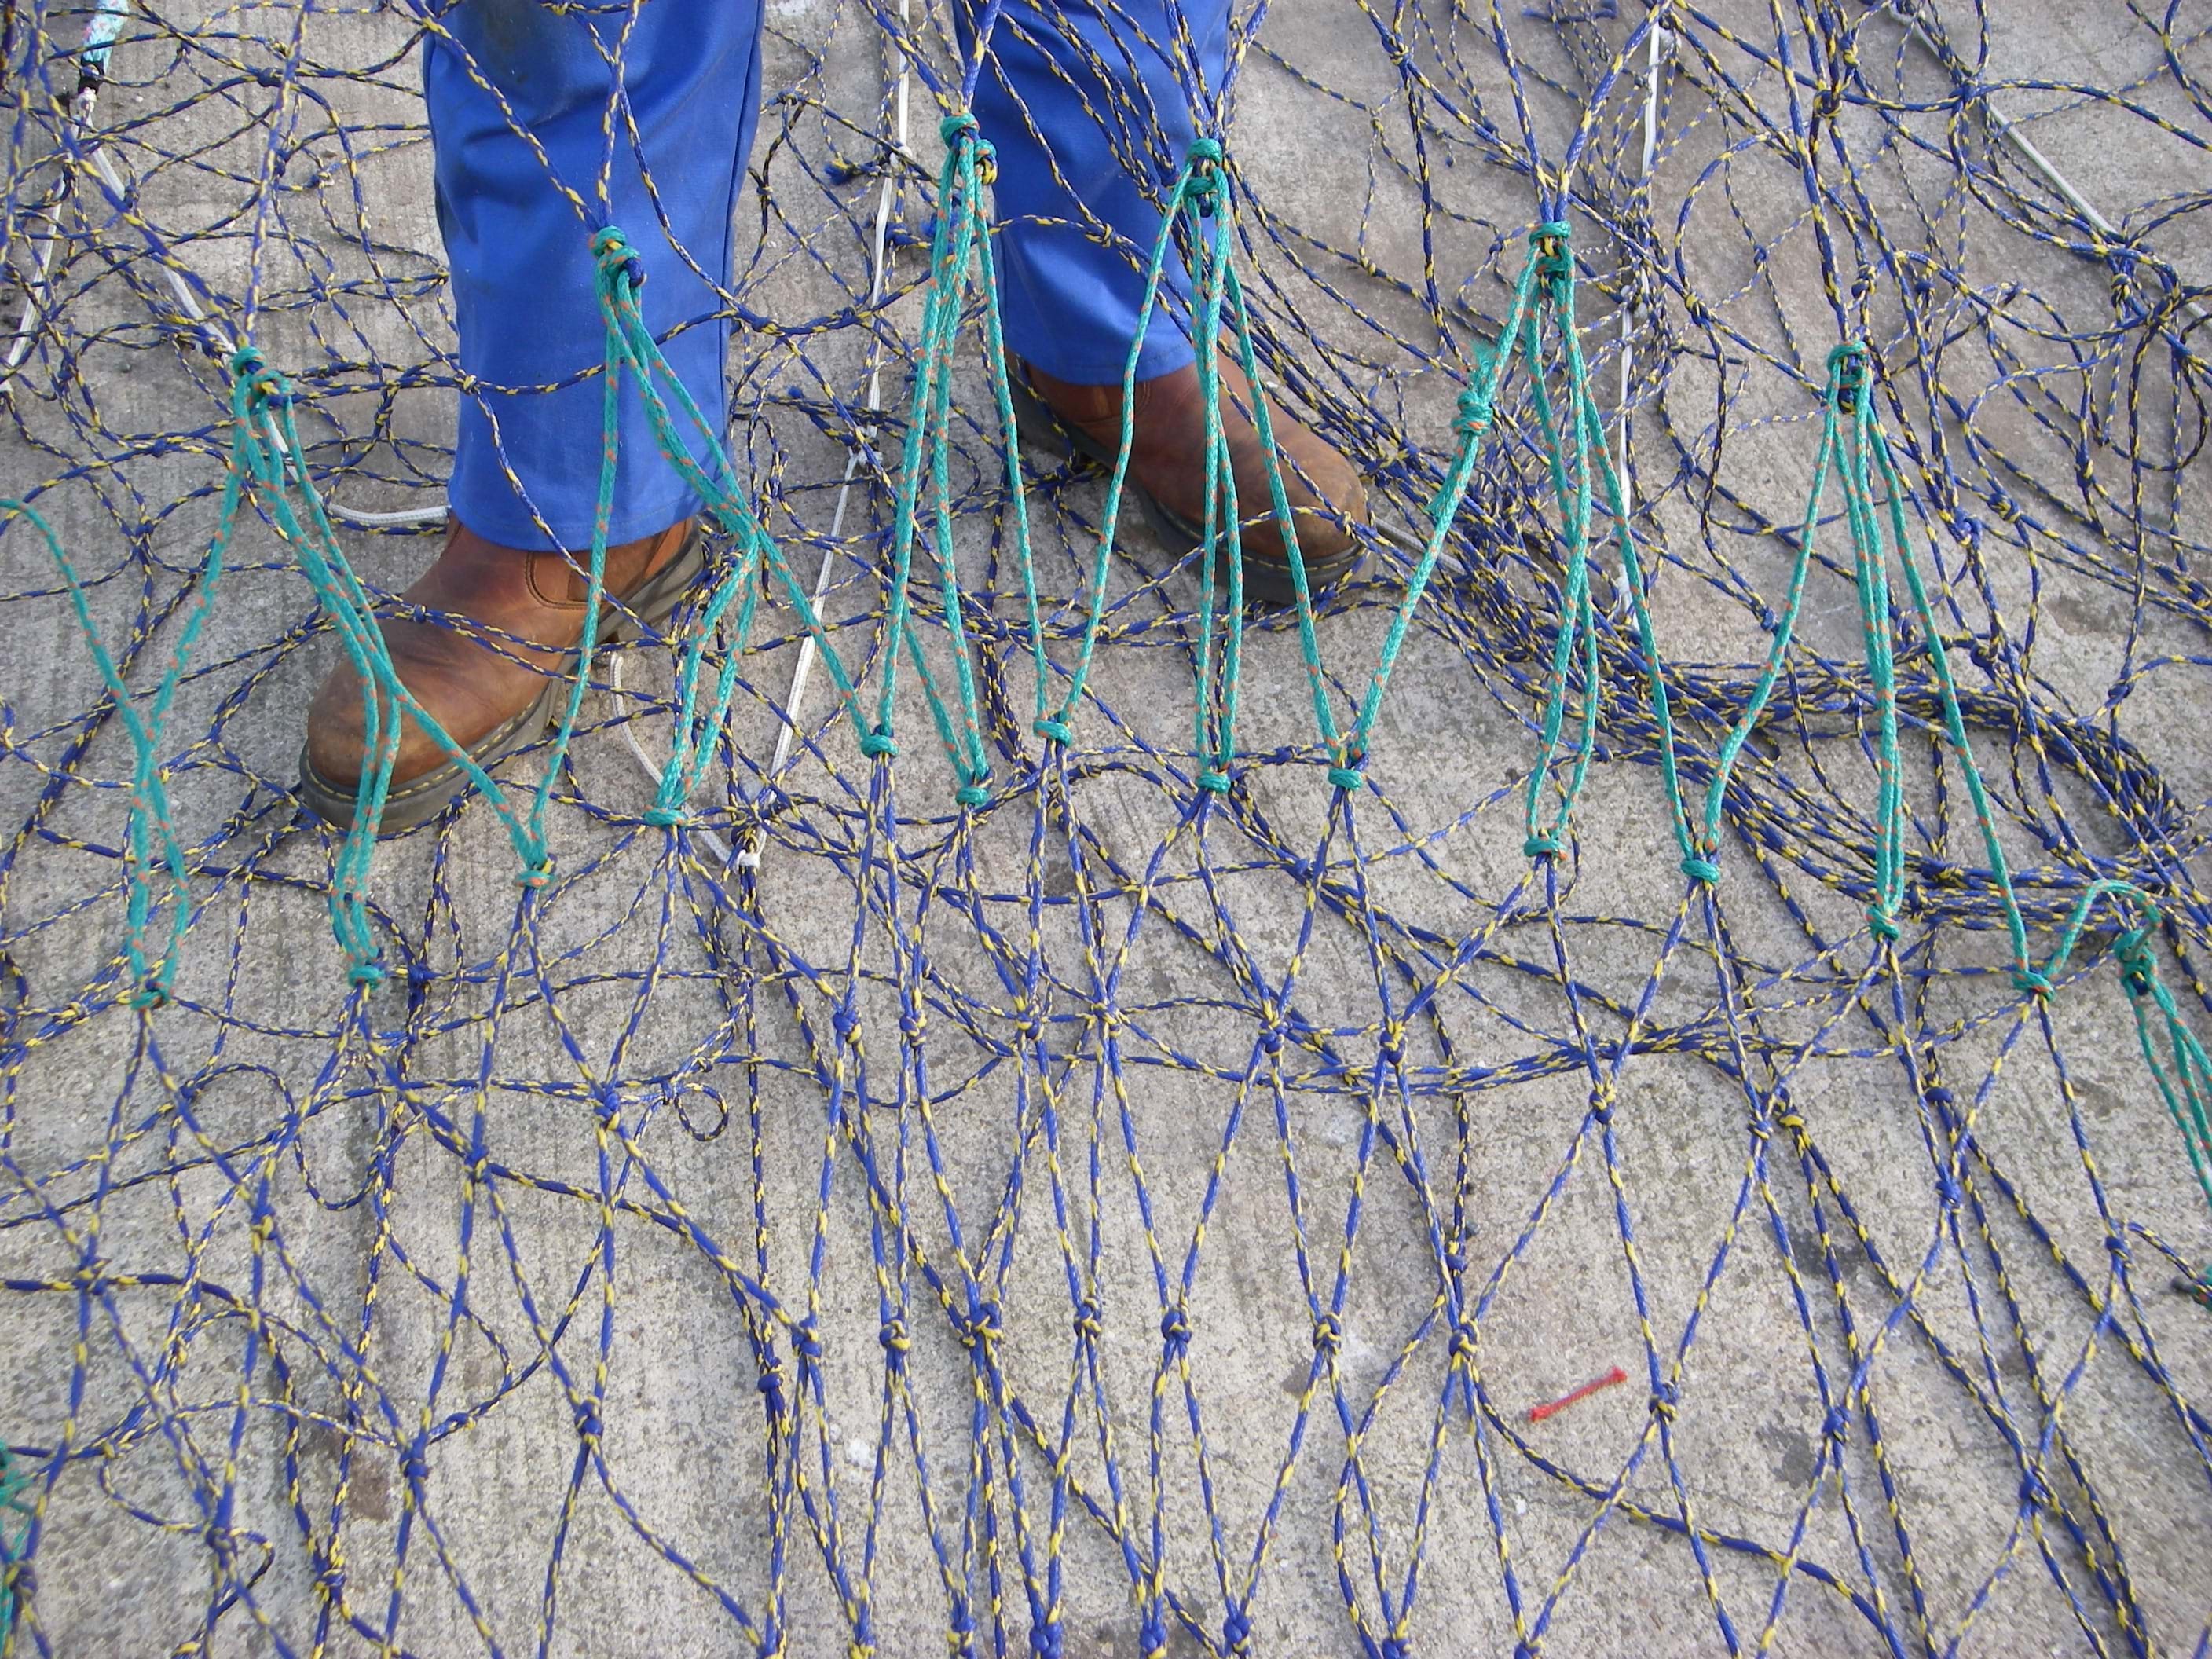 Netting being held up and tight to show diamond shaped mesh